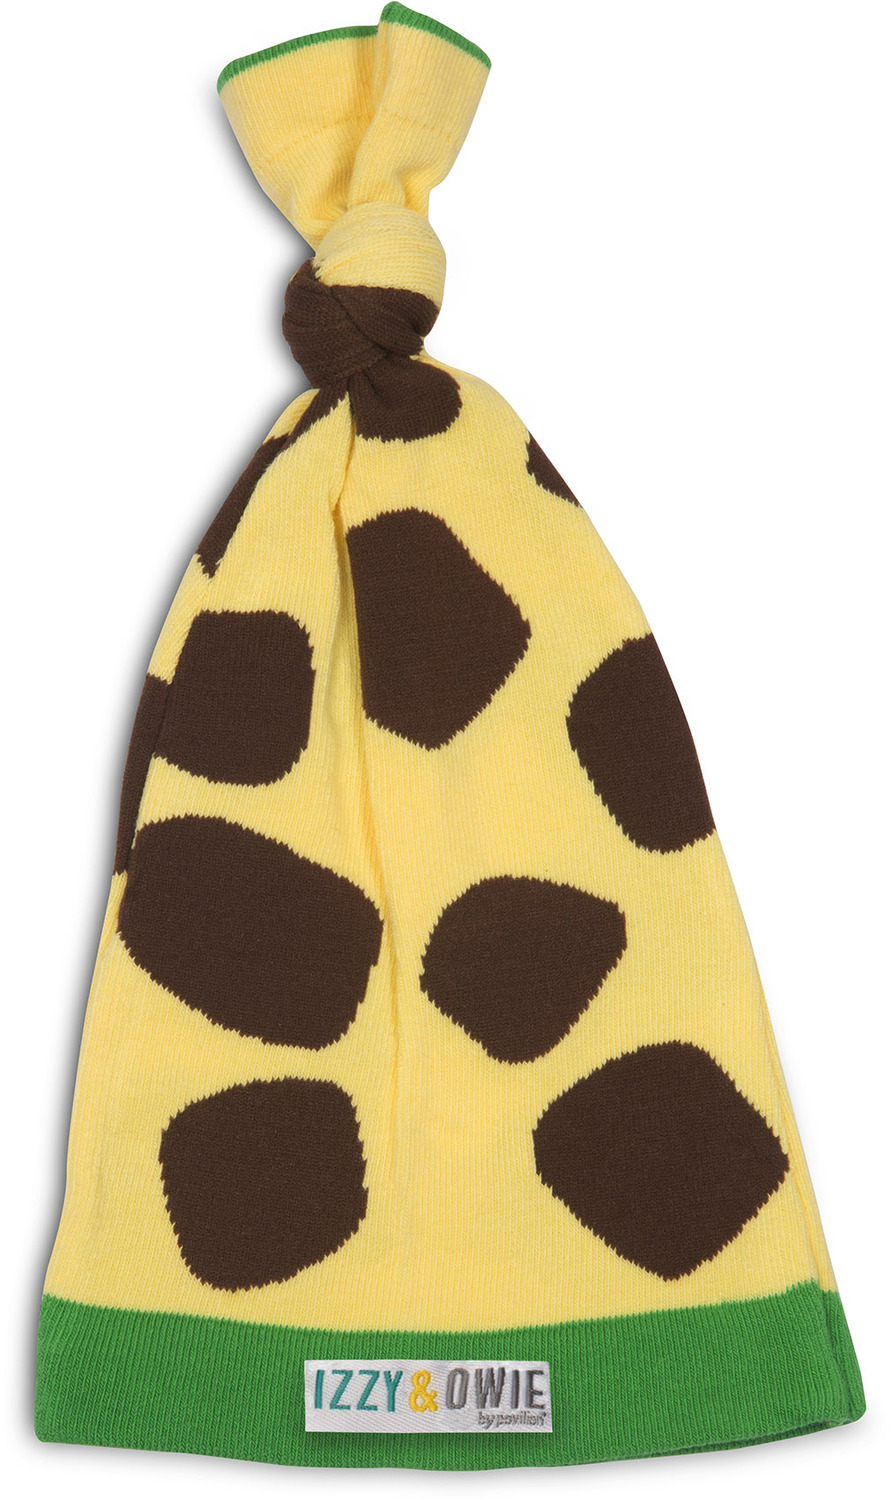 Green and Yellow Giraffe by Izzy & Owie - Green and Yellow Giraffe - One Size Fits All Baby Hat